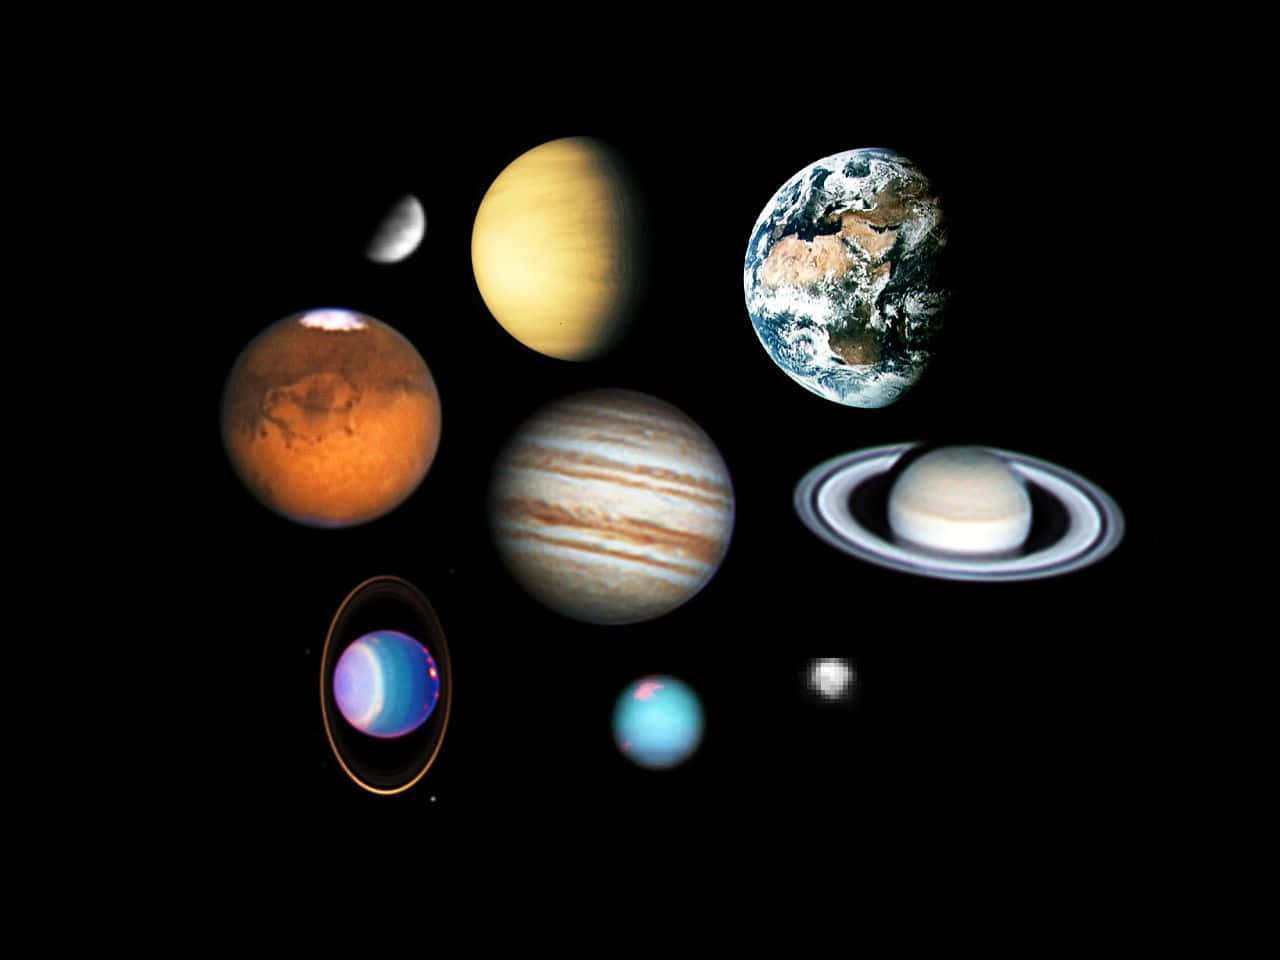 Download A Group Of Planets In A Black Background | Wallpapers.com